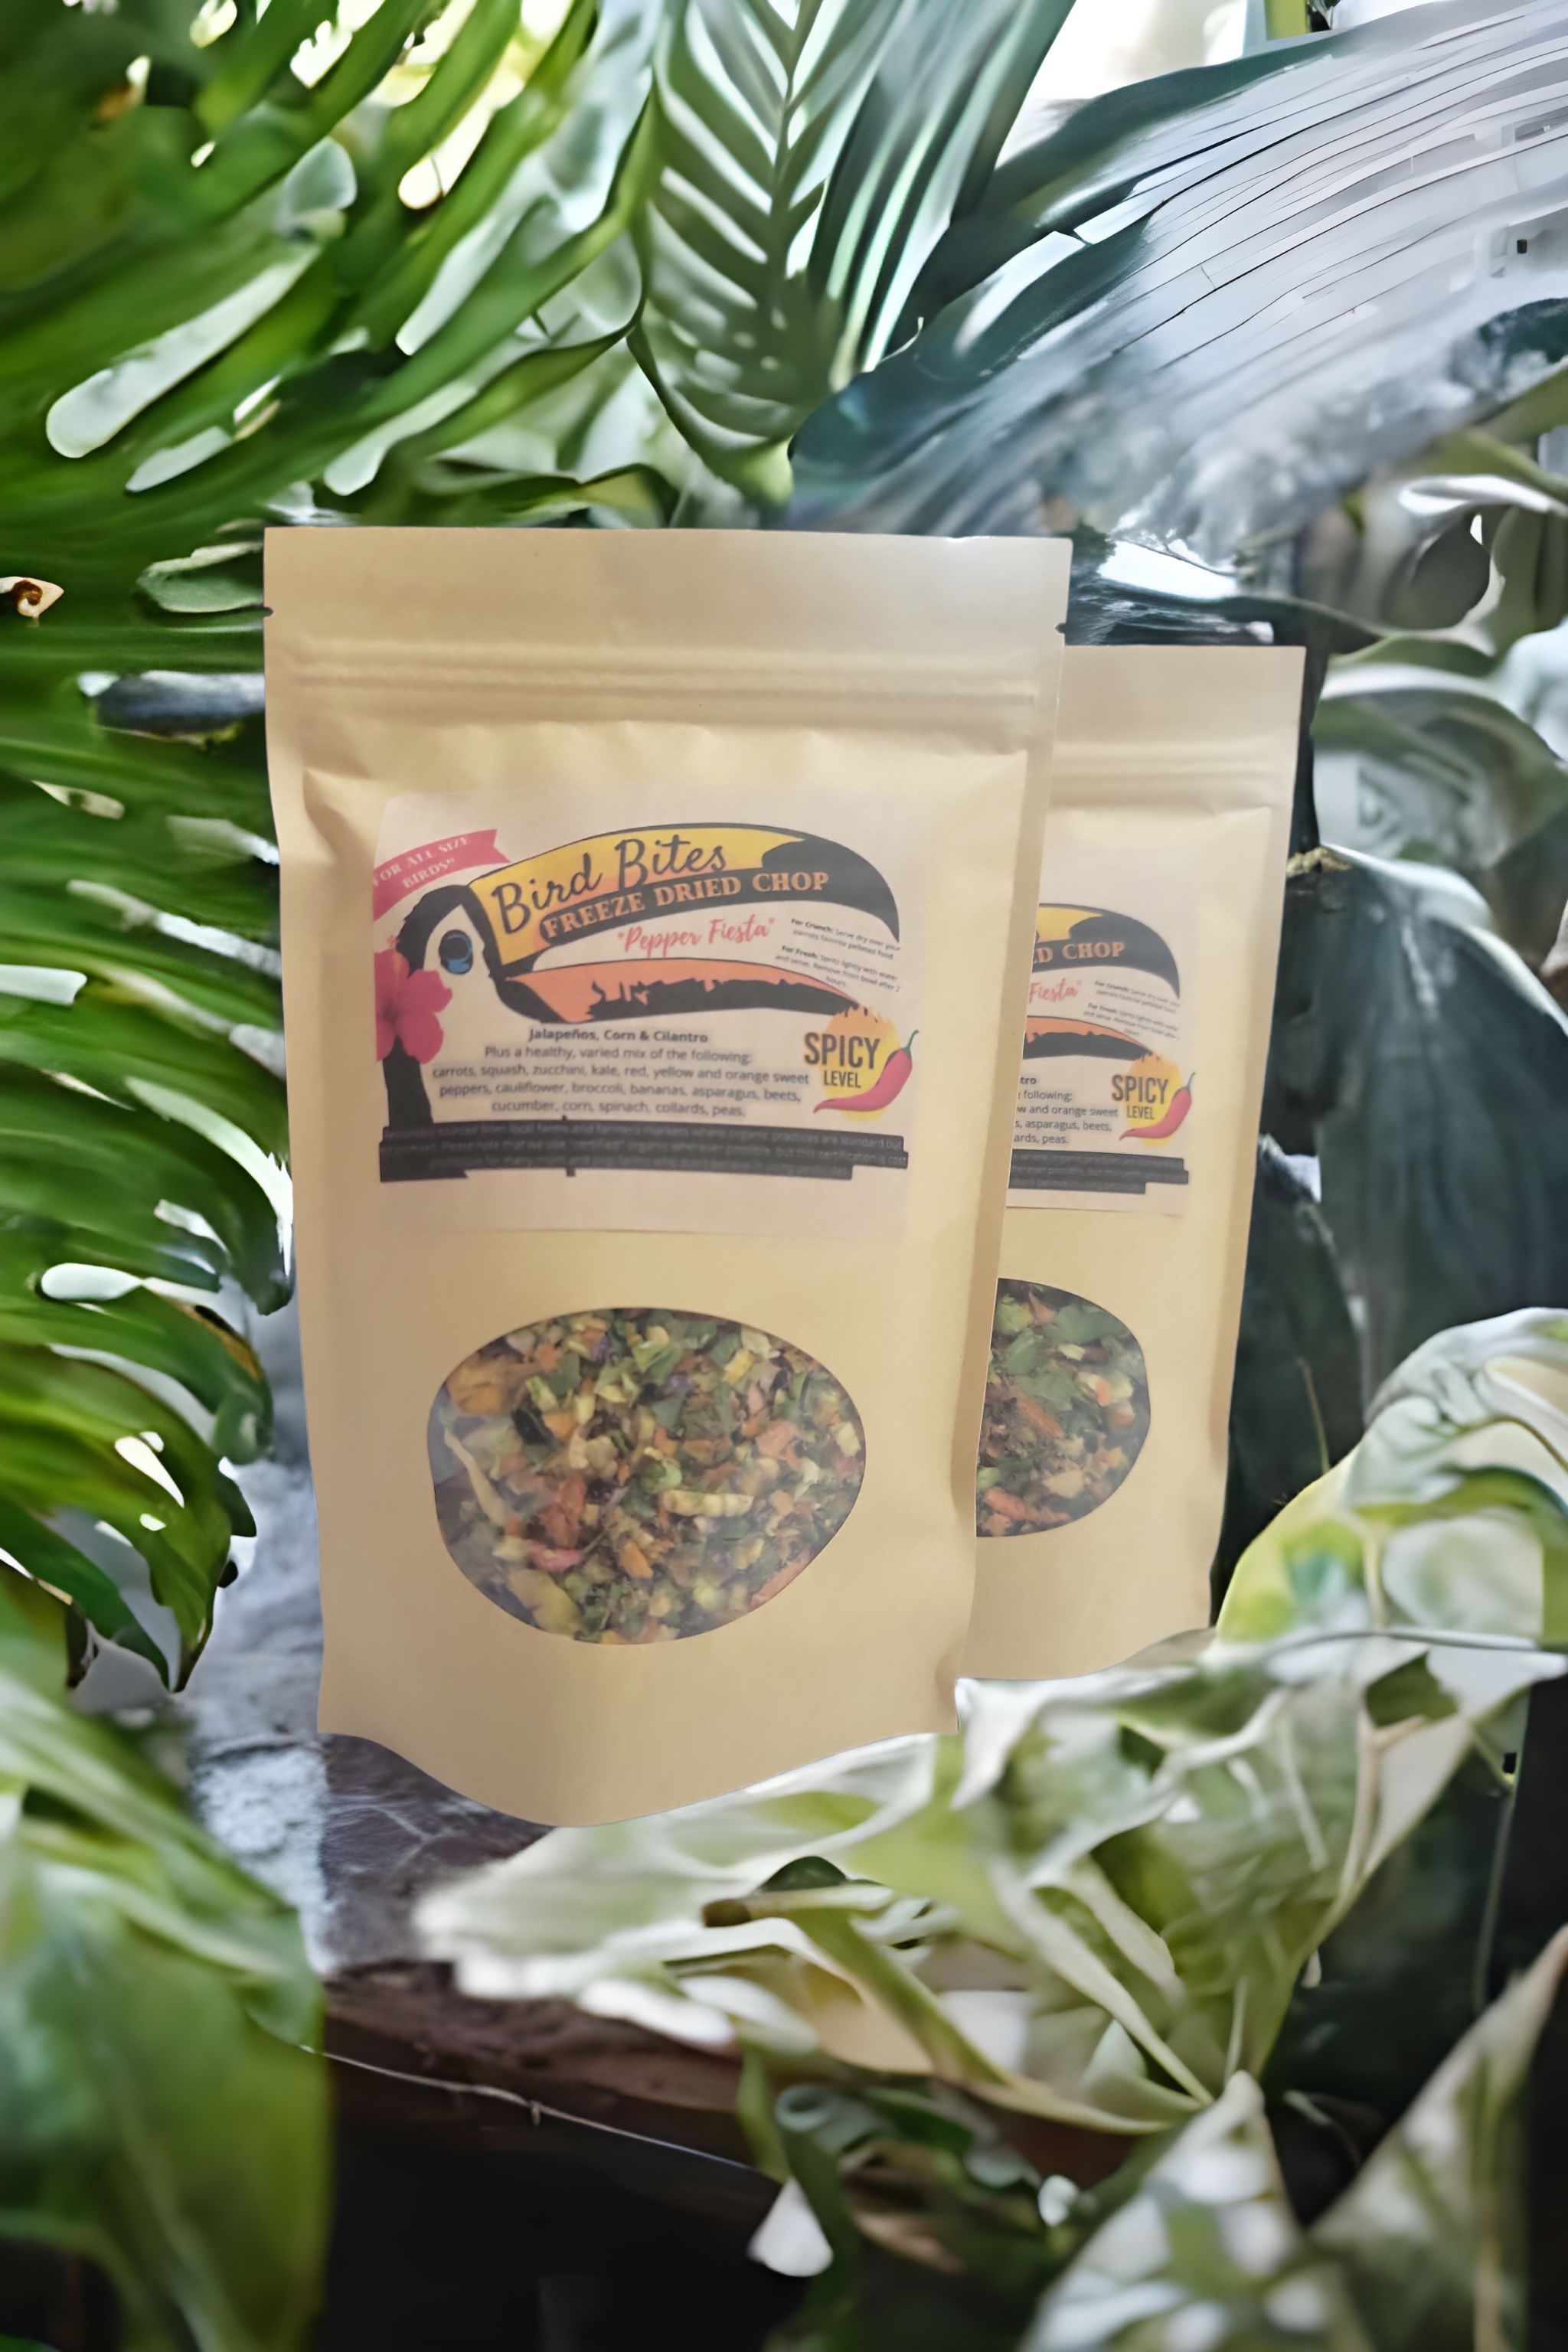 Bird Bites Freeze Dried Chop - Daily Fruits & Veggies, 4 Flavors to Choose From